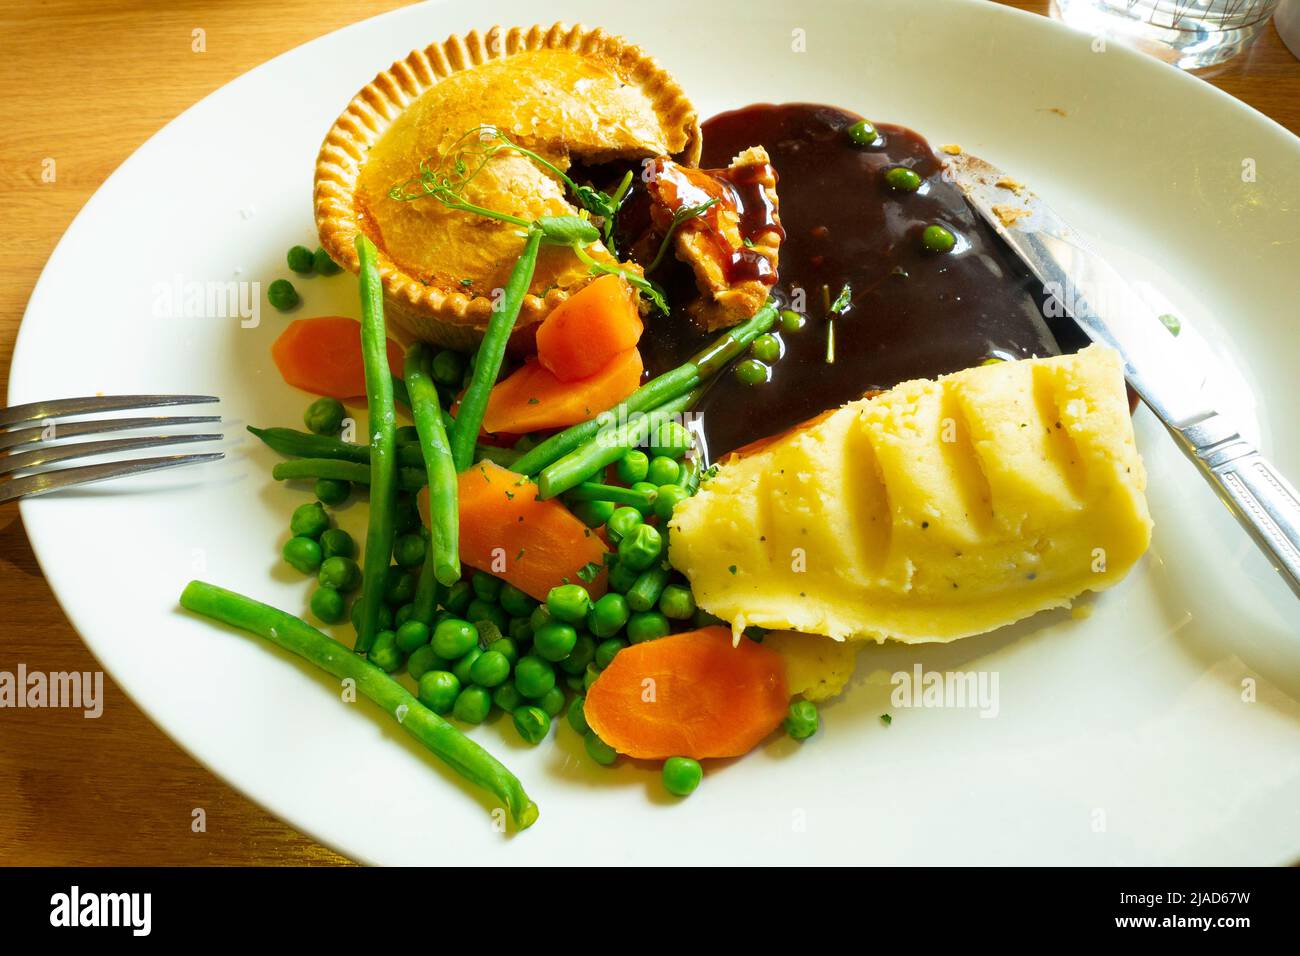 Tasty meal steak and ale pie cut open with mashed potatoes Tender Stem  broccoli carrots peas and gravy Stock Photo